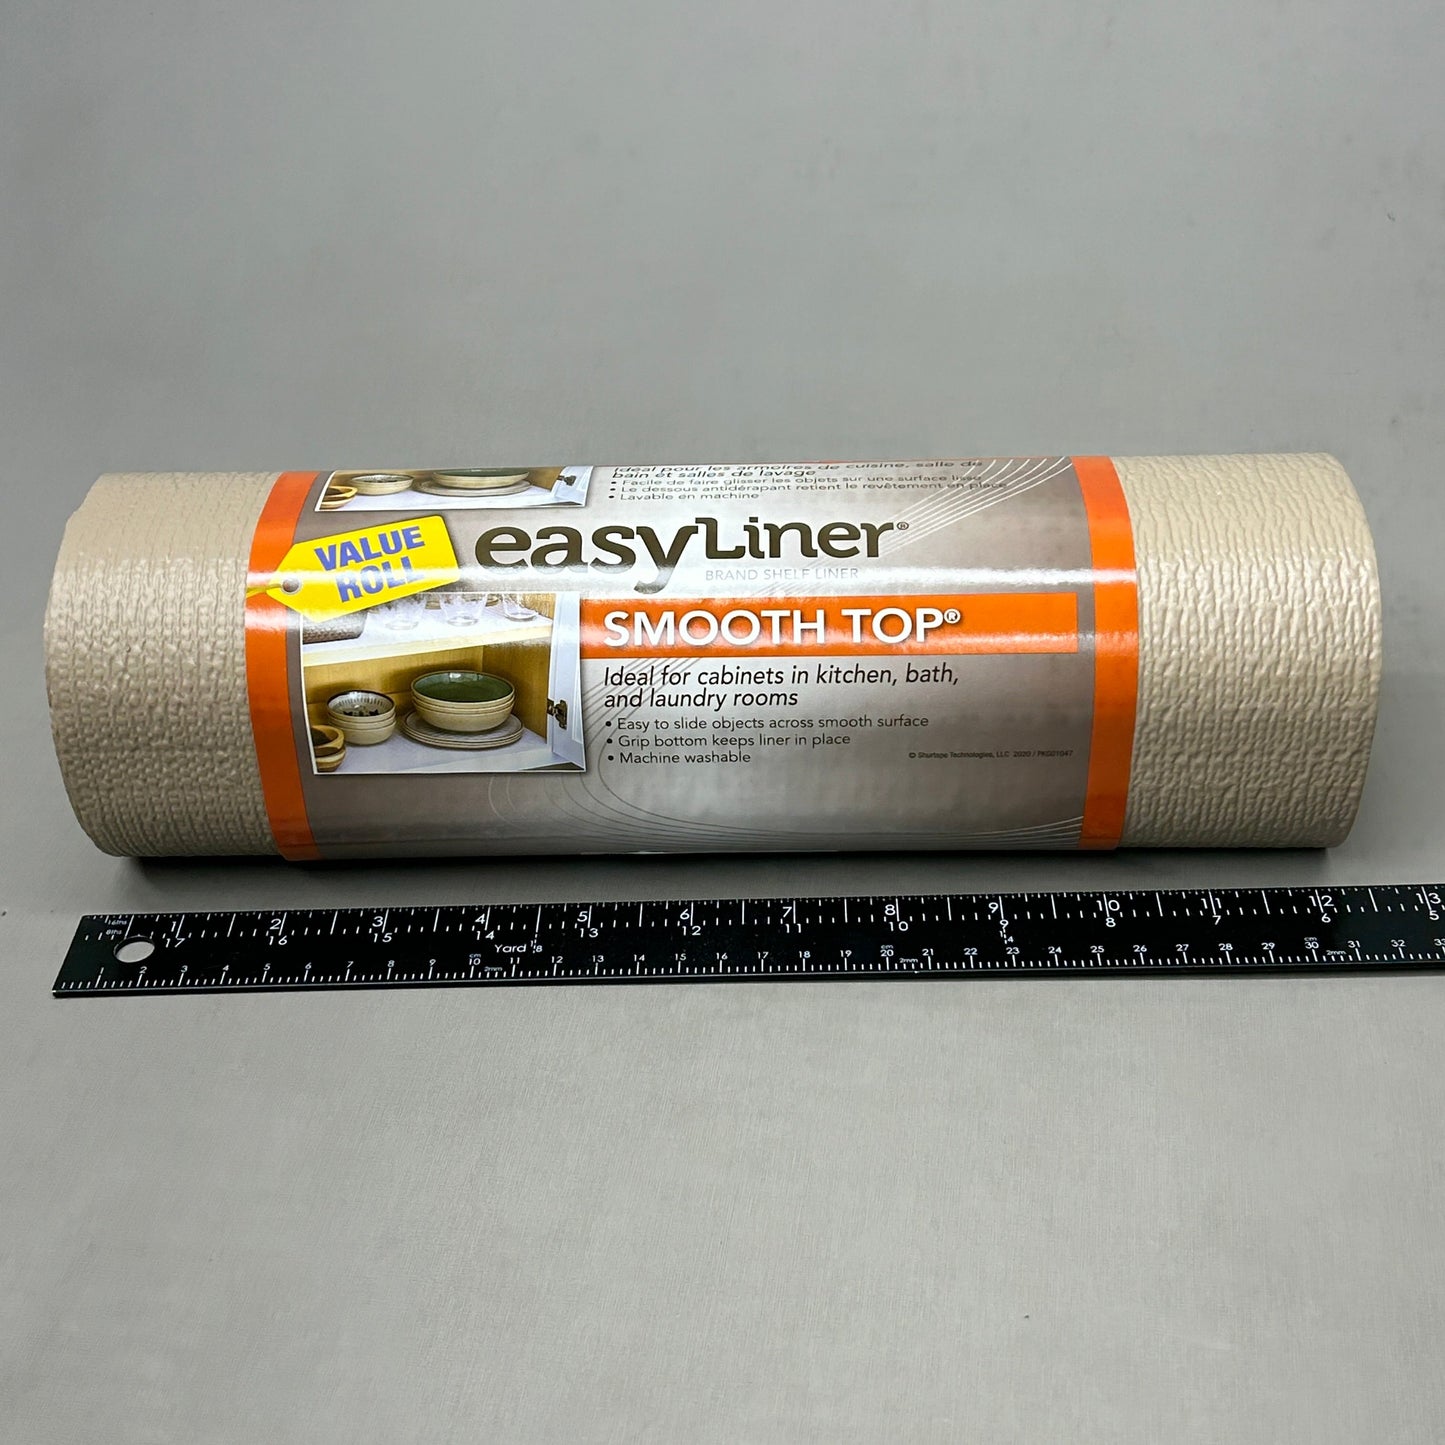 Duck Smooth Top EasyLiner 12-in x 24-ft Taupe Shelf Liner in the